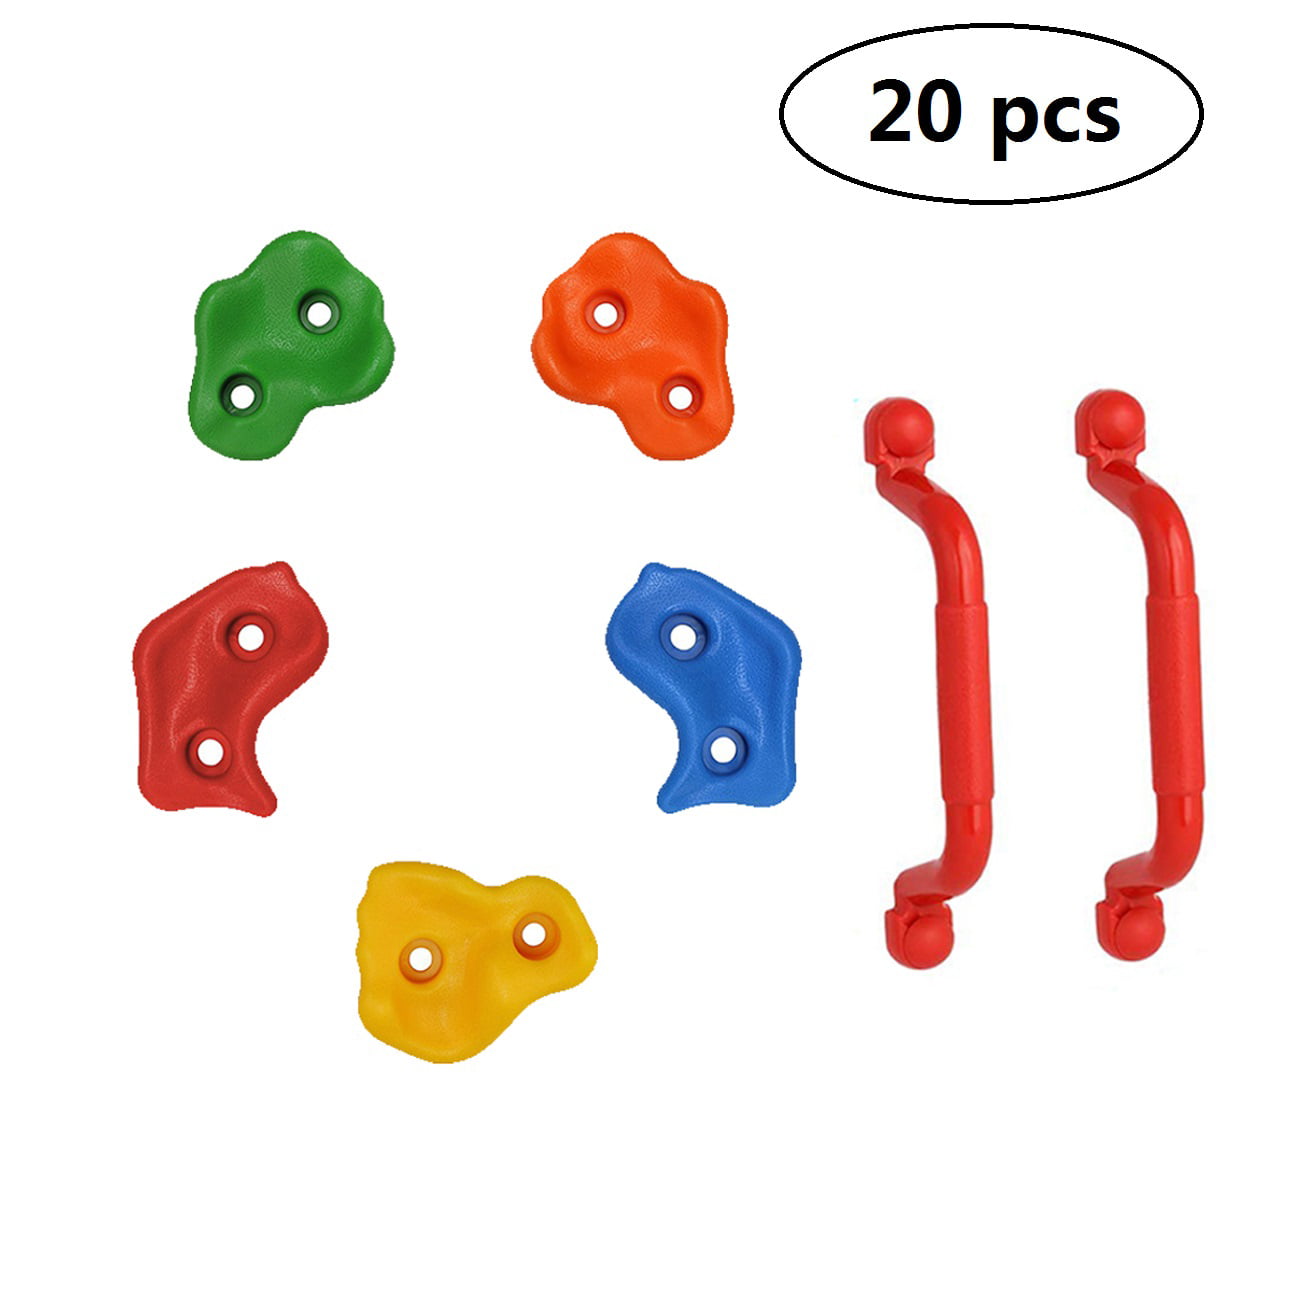 25 Rock Climbing Holds for Kids Wall Grips W/ Rope and mounting hardware 